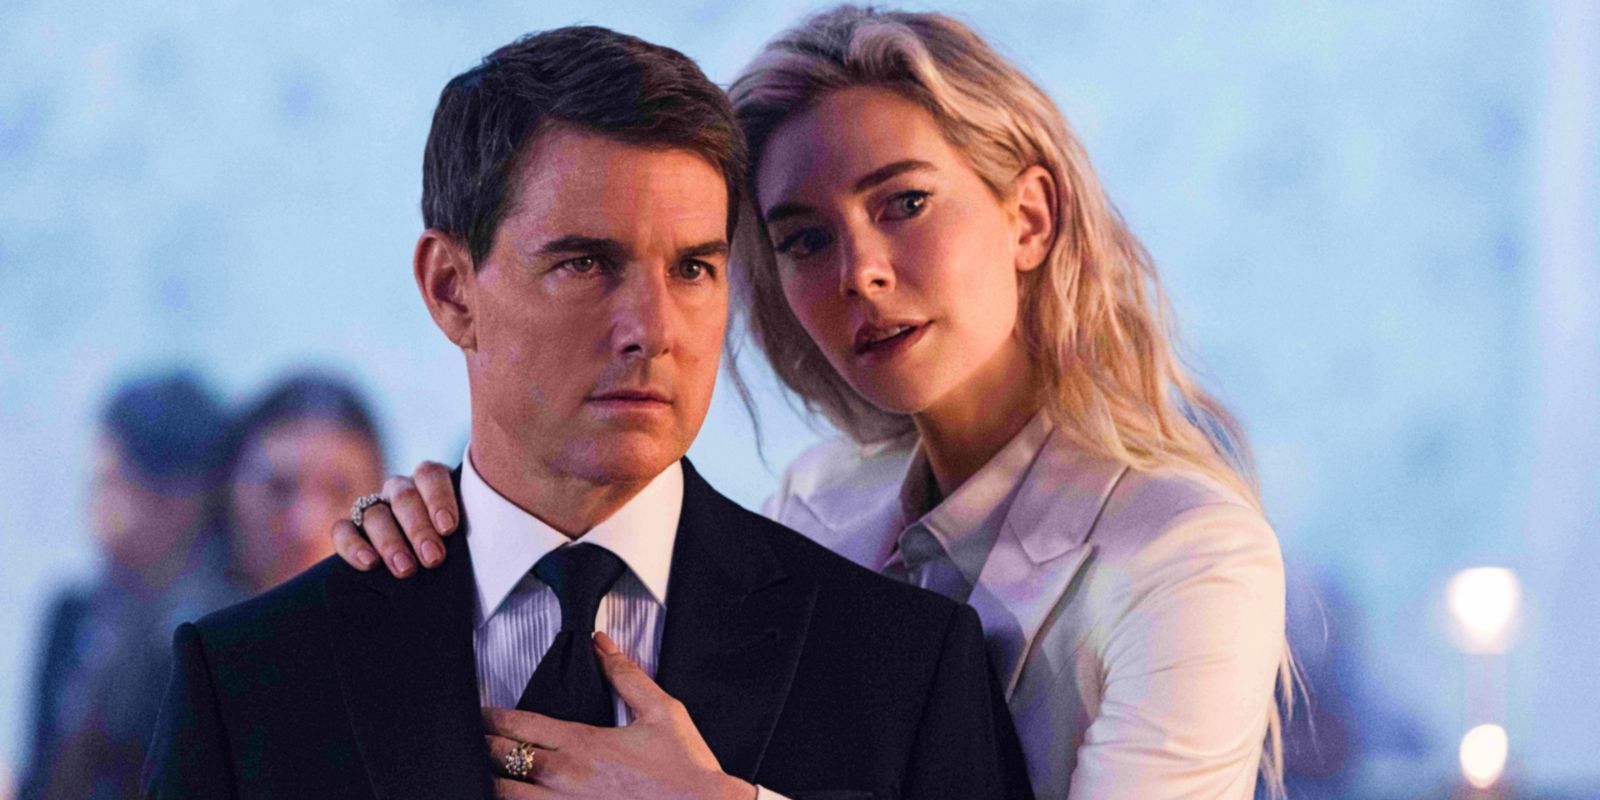 Mission: Impossible 7's Tom Cruise is seduced by The White Widow.